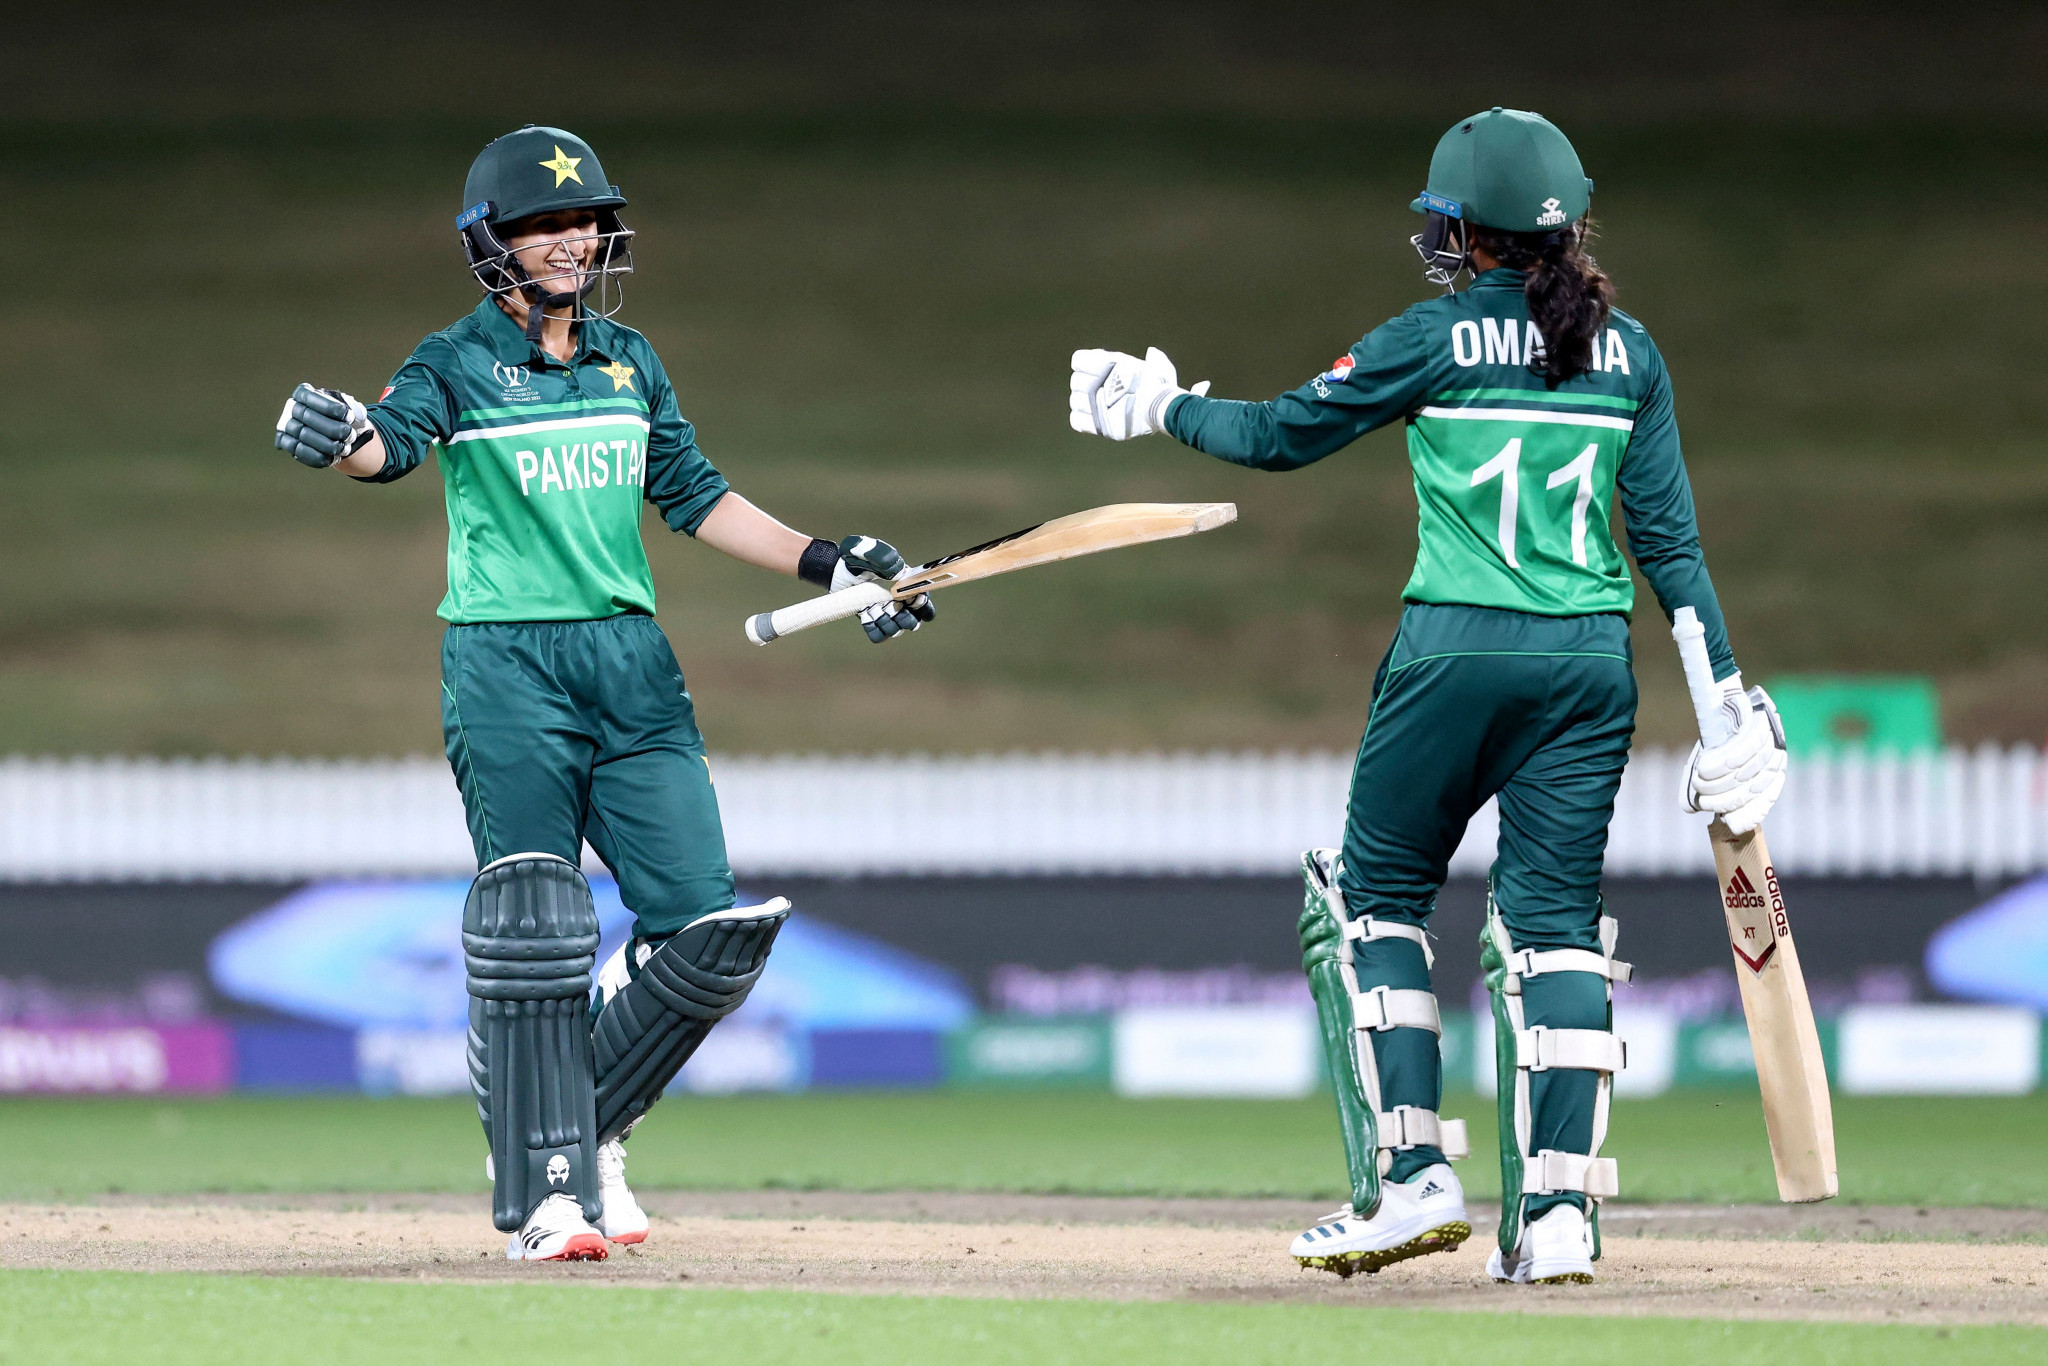 Dar leads Pakistan to historic victory over West Indies at Women’s Cricket World Cup